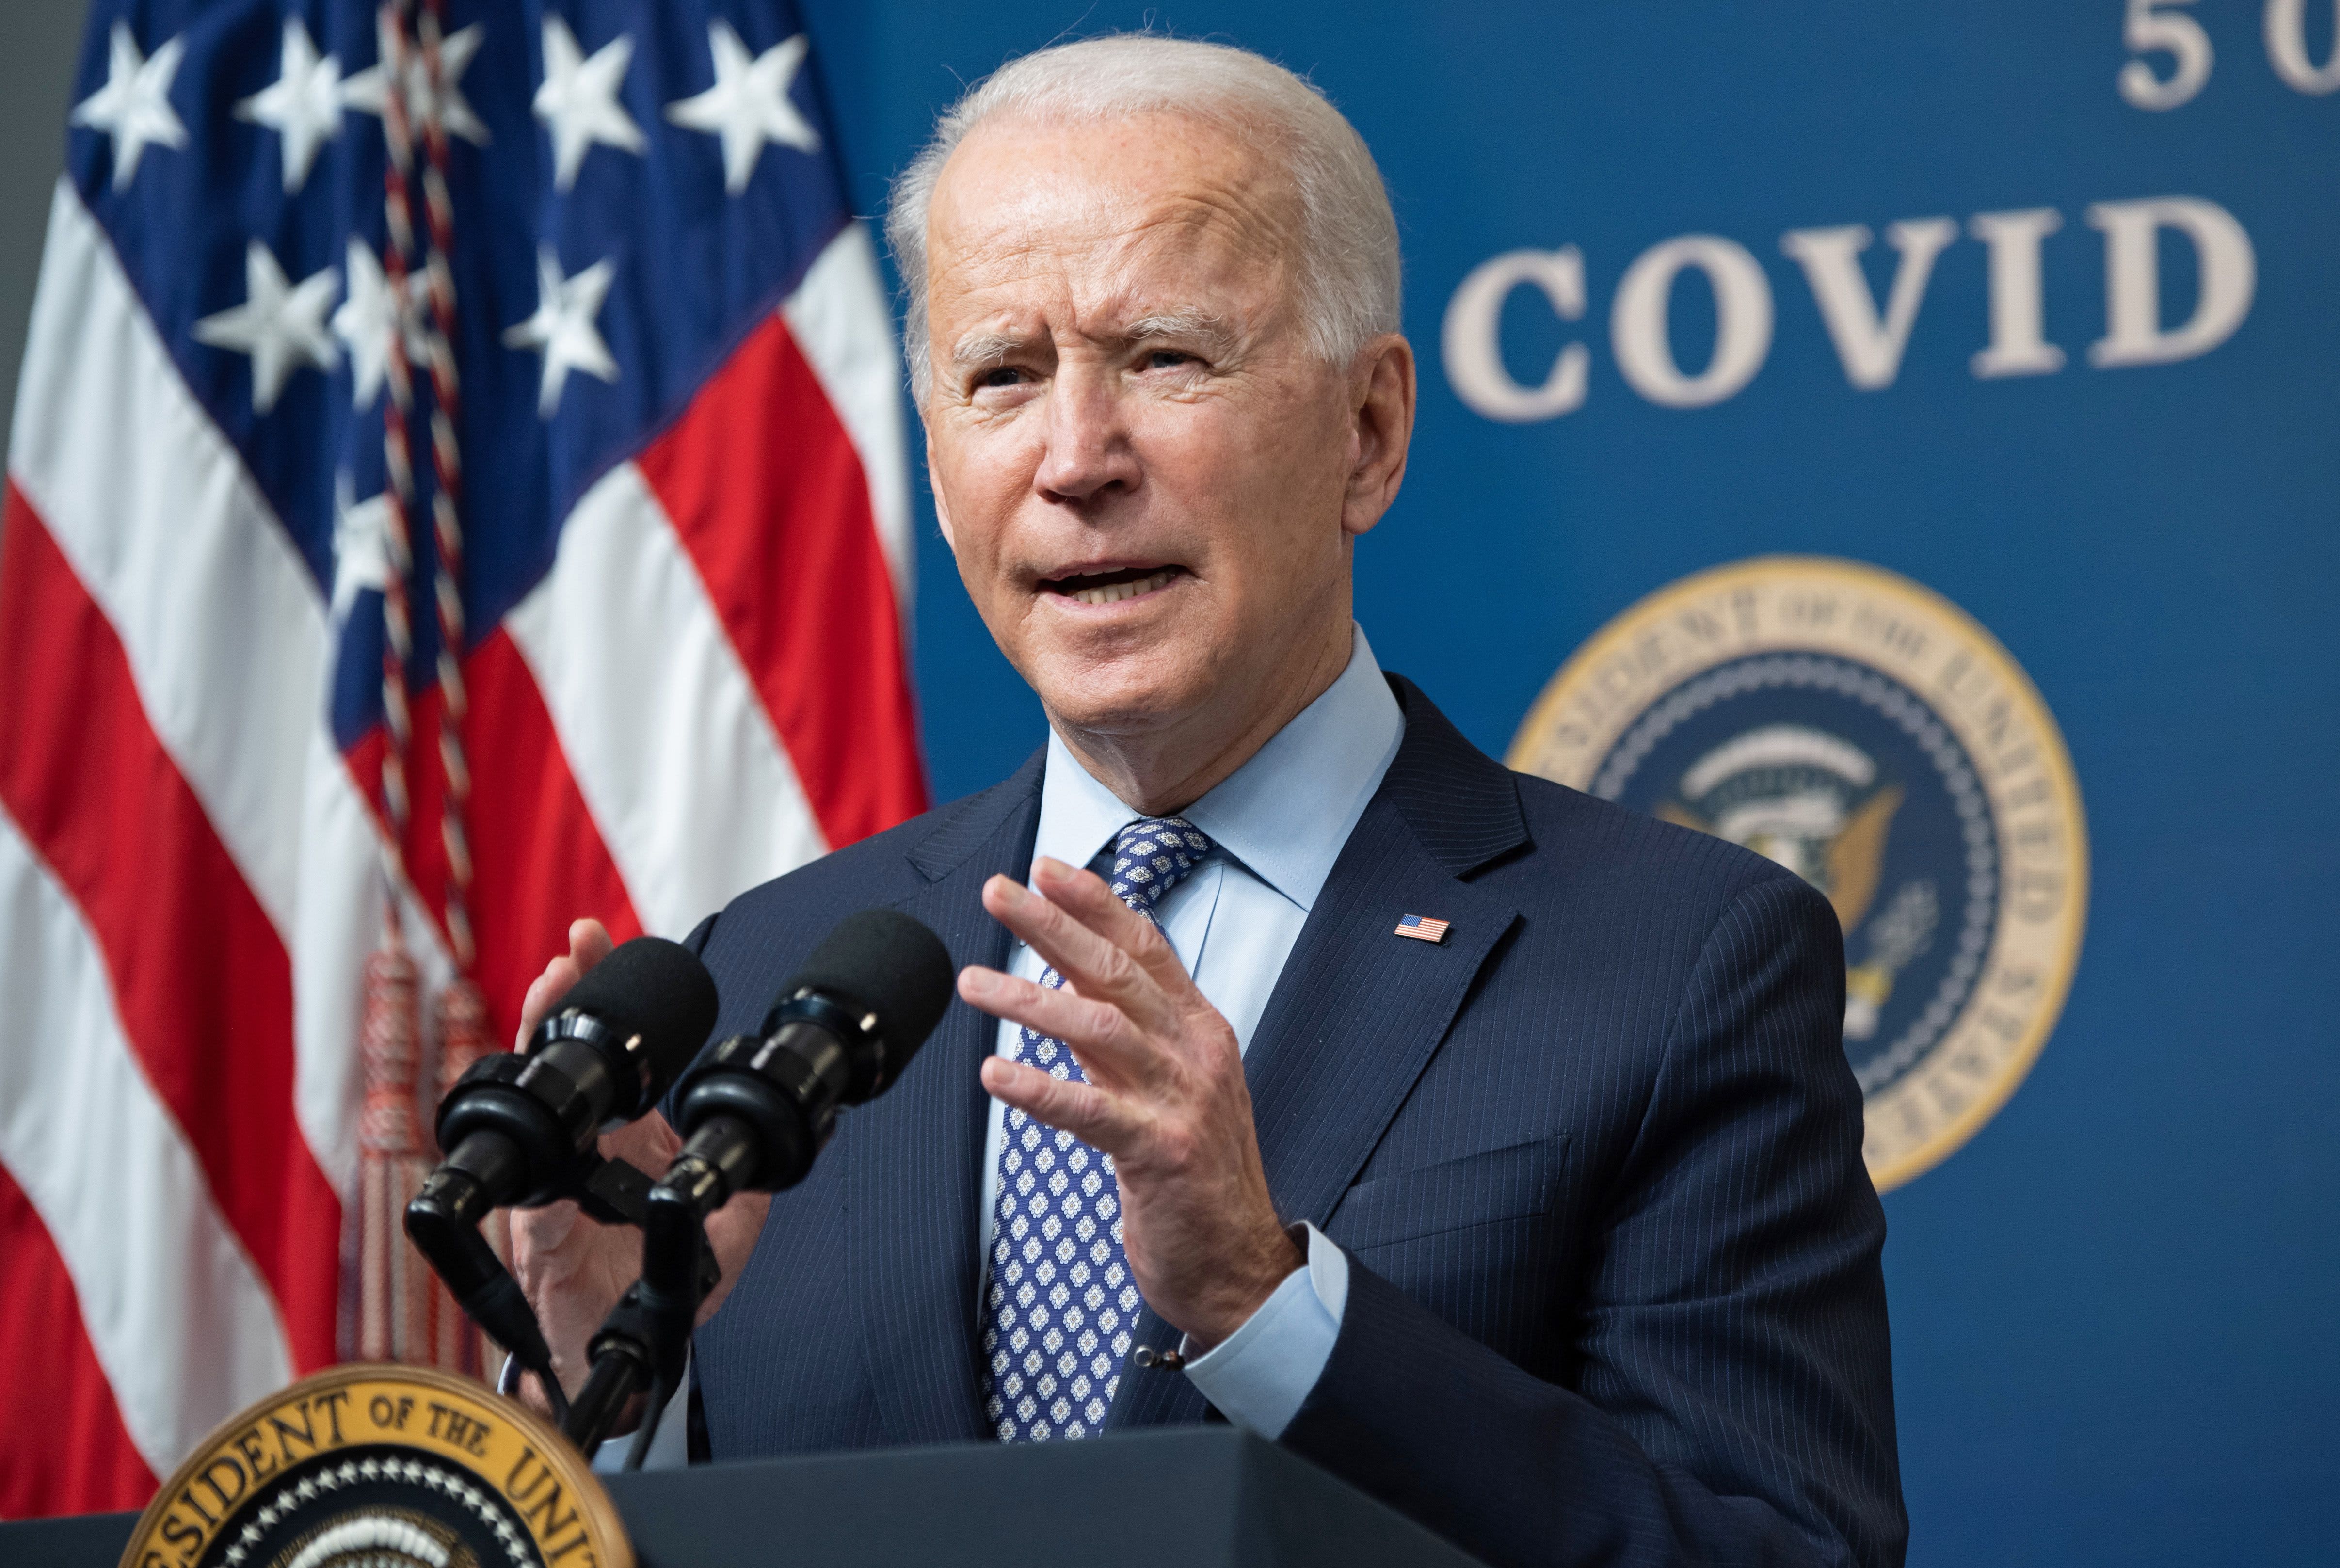 Big Pharma lobbyists launch campaign against Biden over Covid vaccine patent waiver